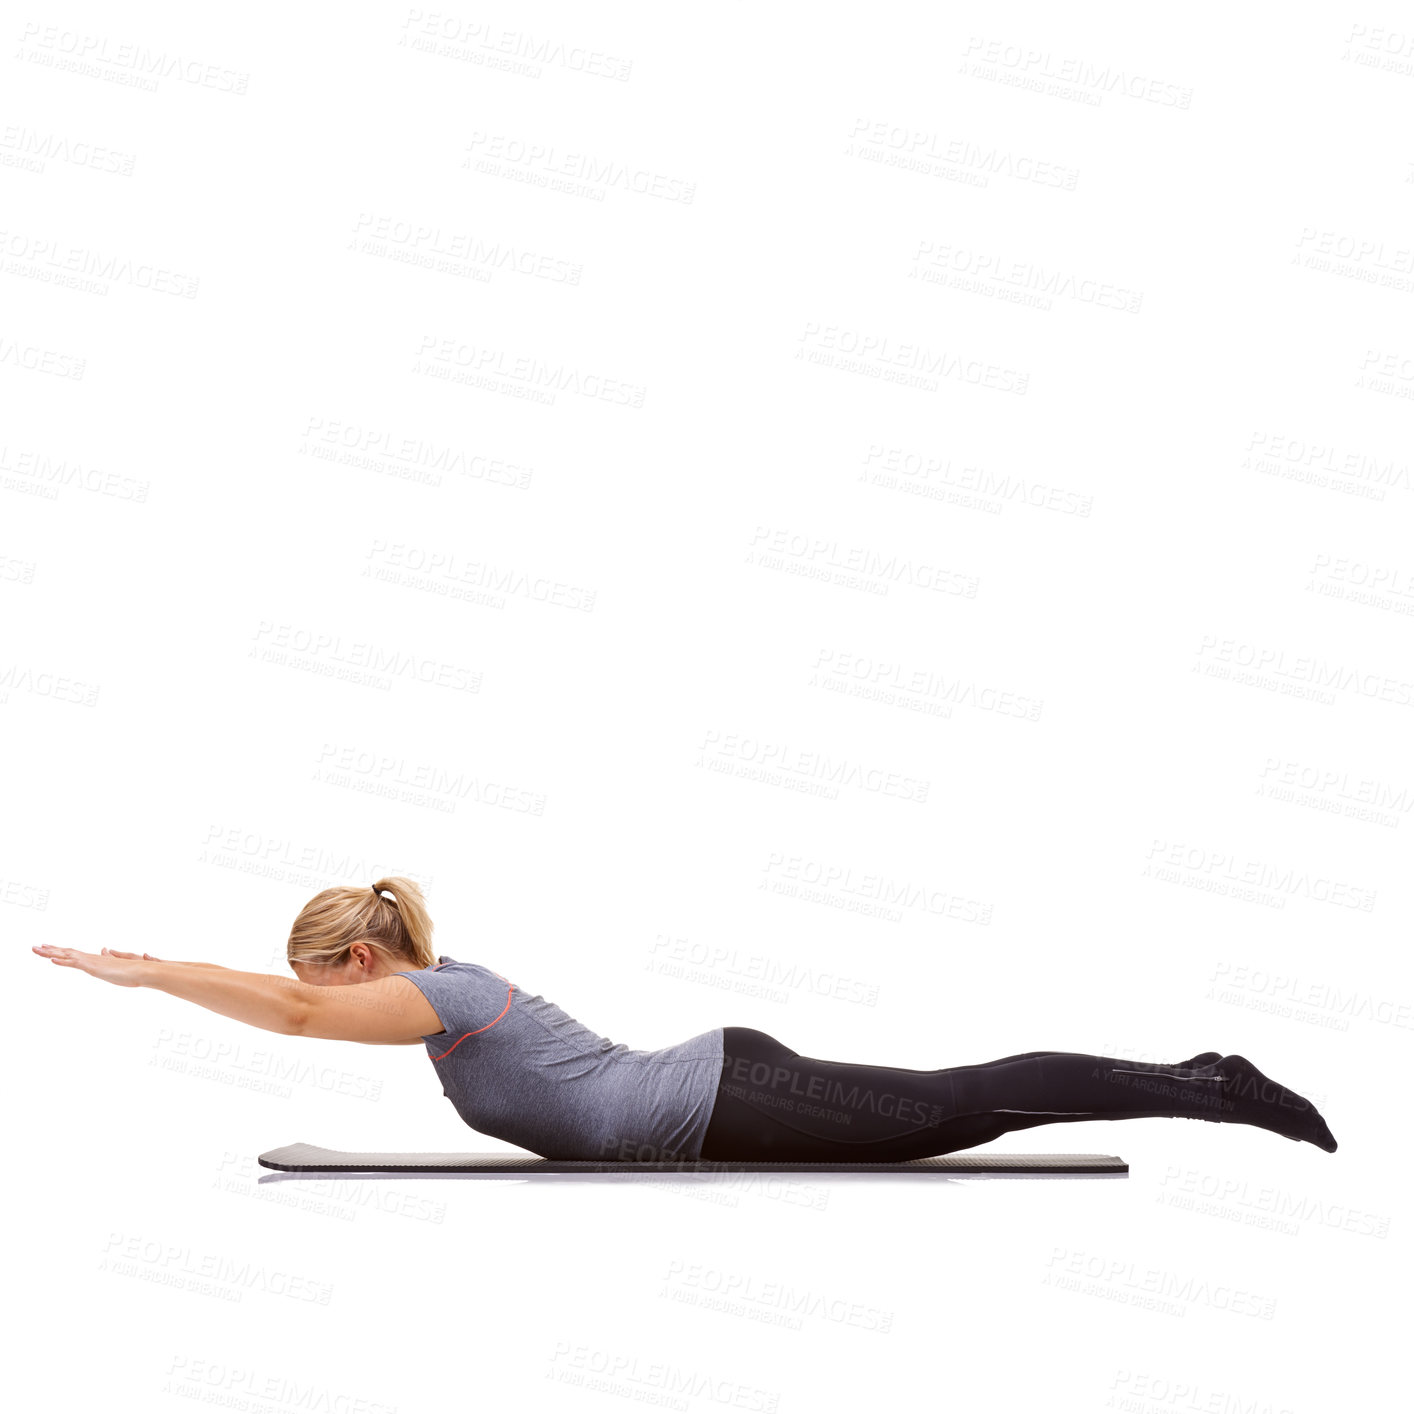 Buy stock photo A young woman exercising on a yoga mat